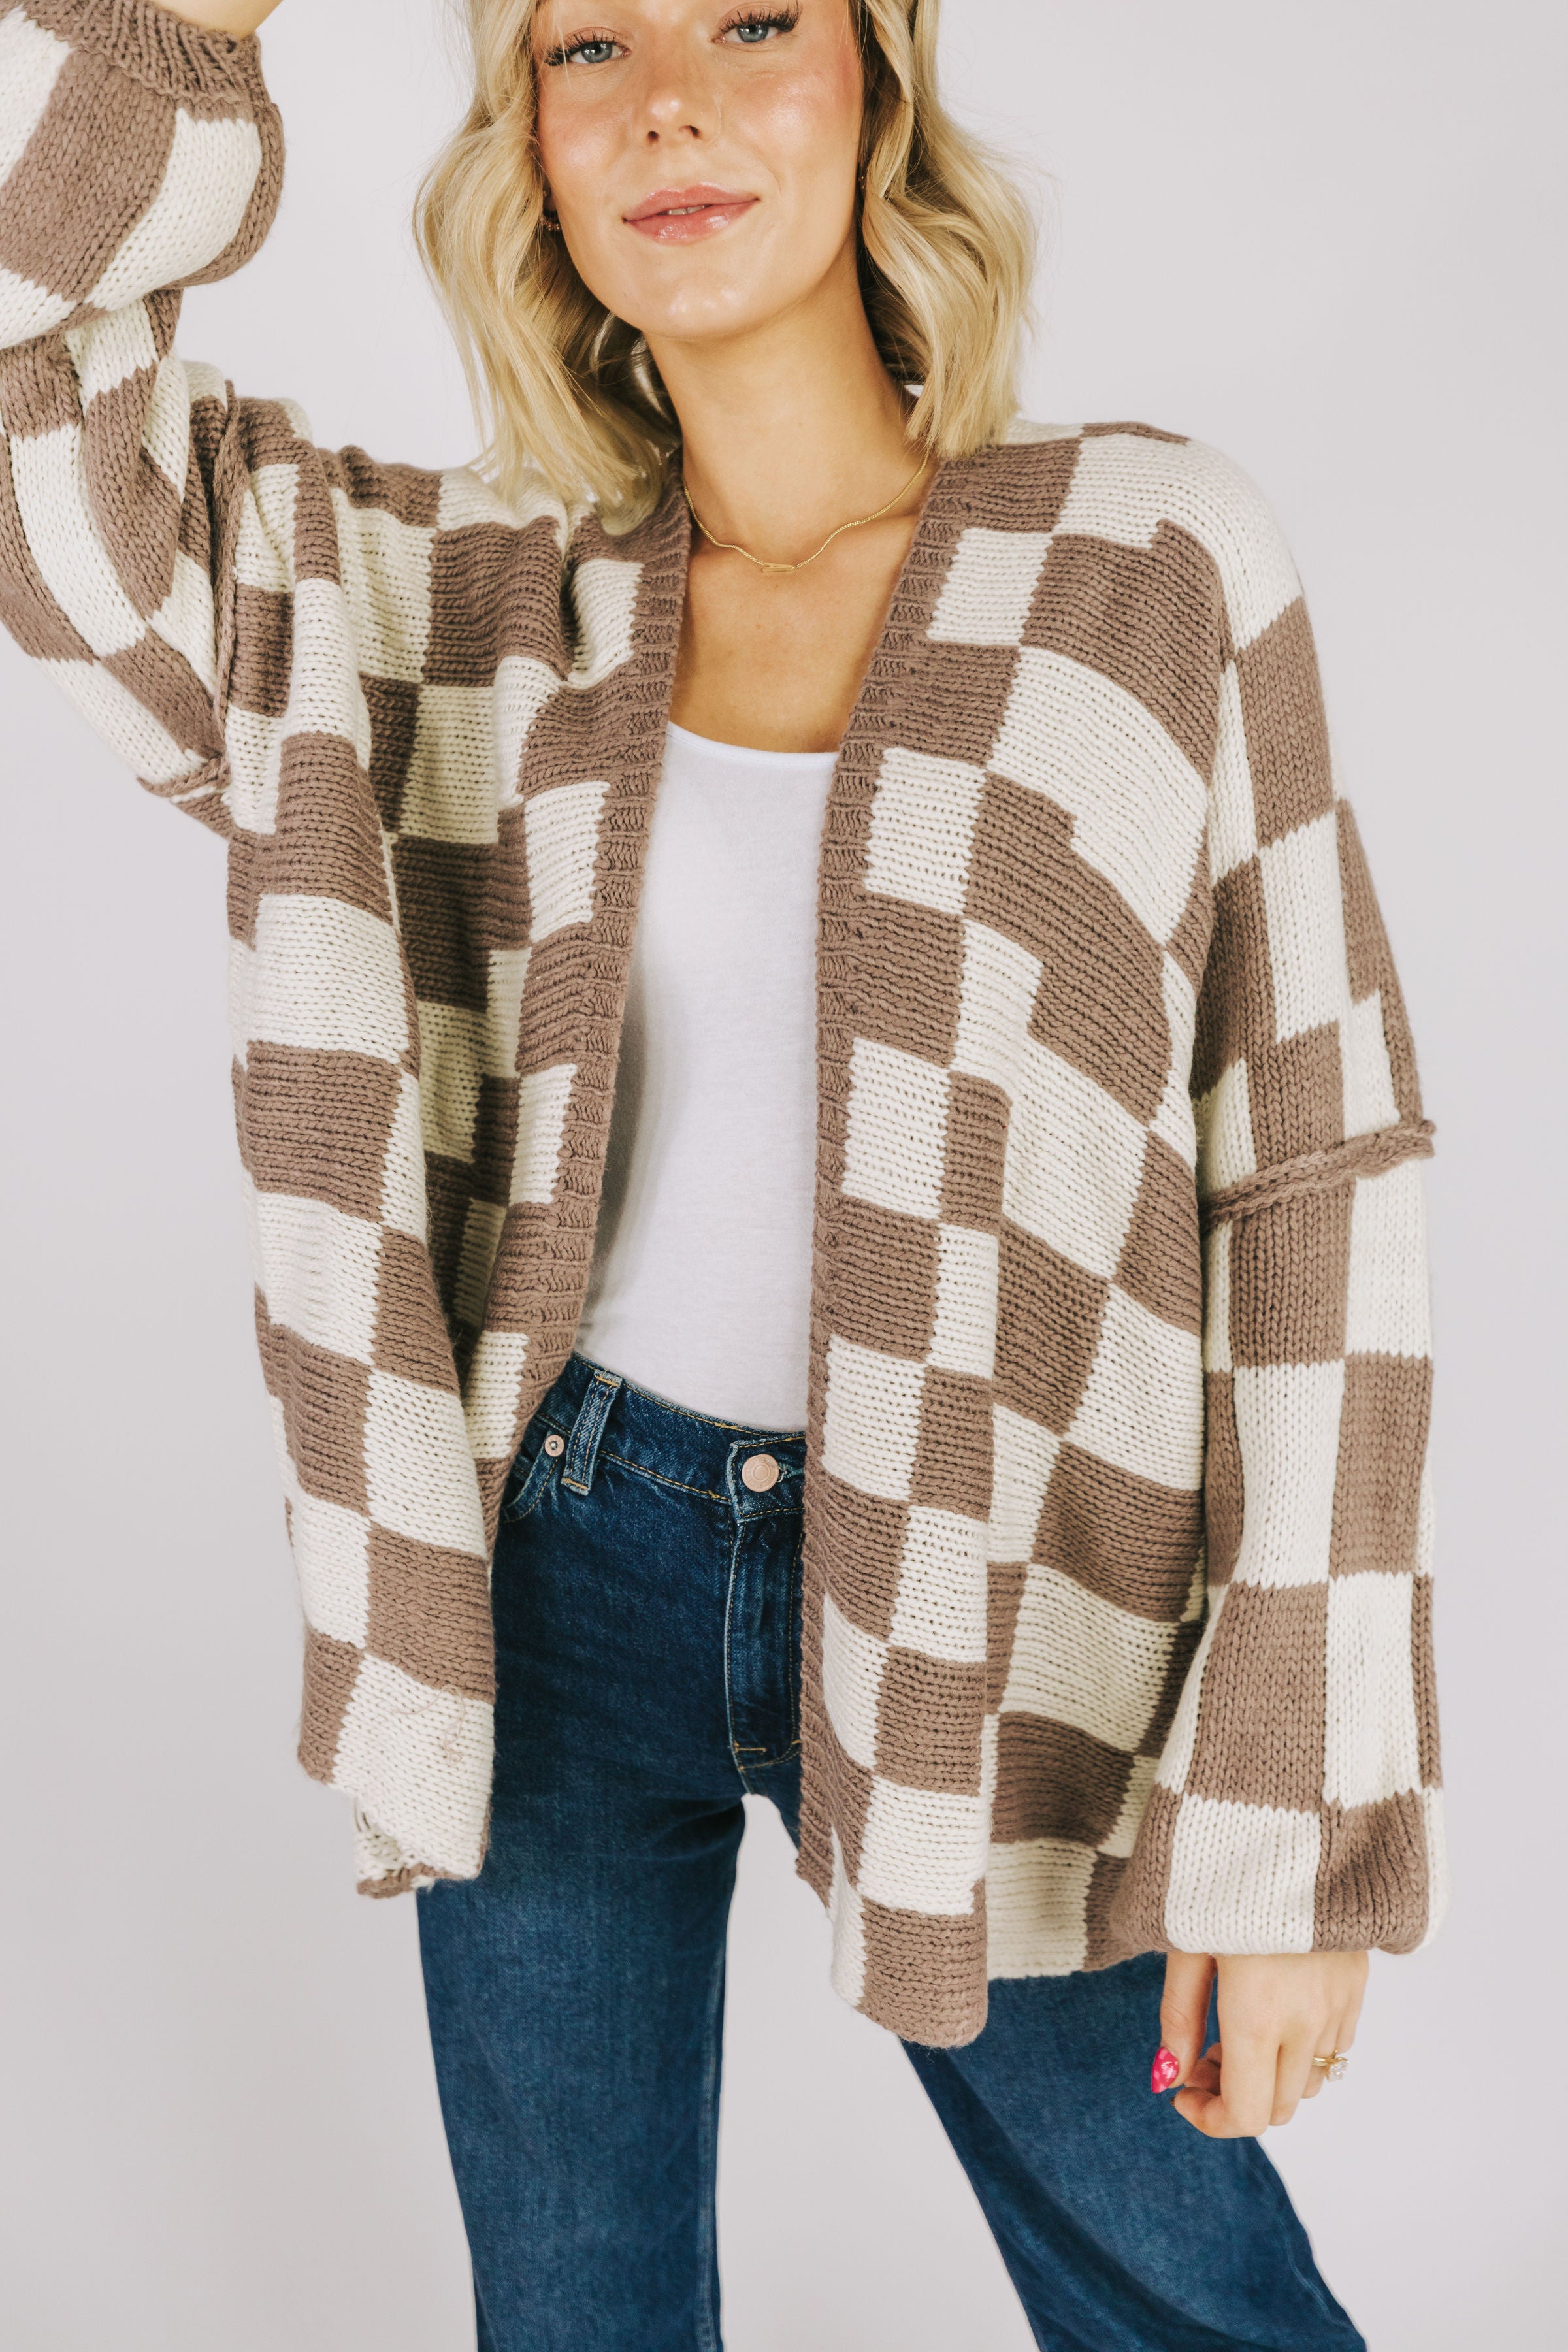 Give Everything Cardigan - New Color!